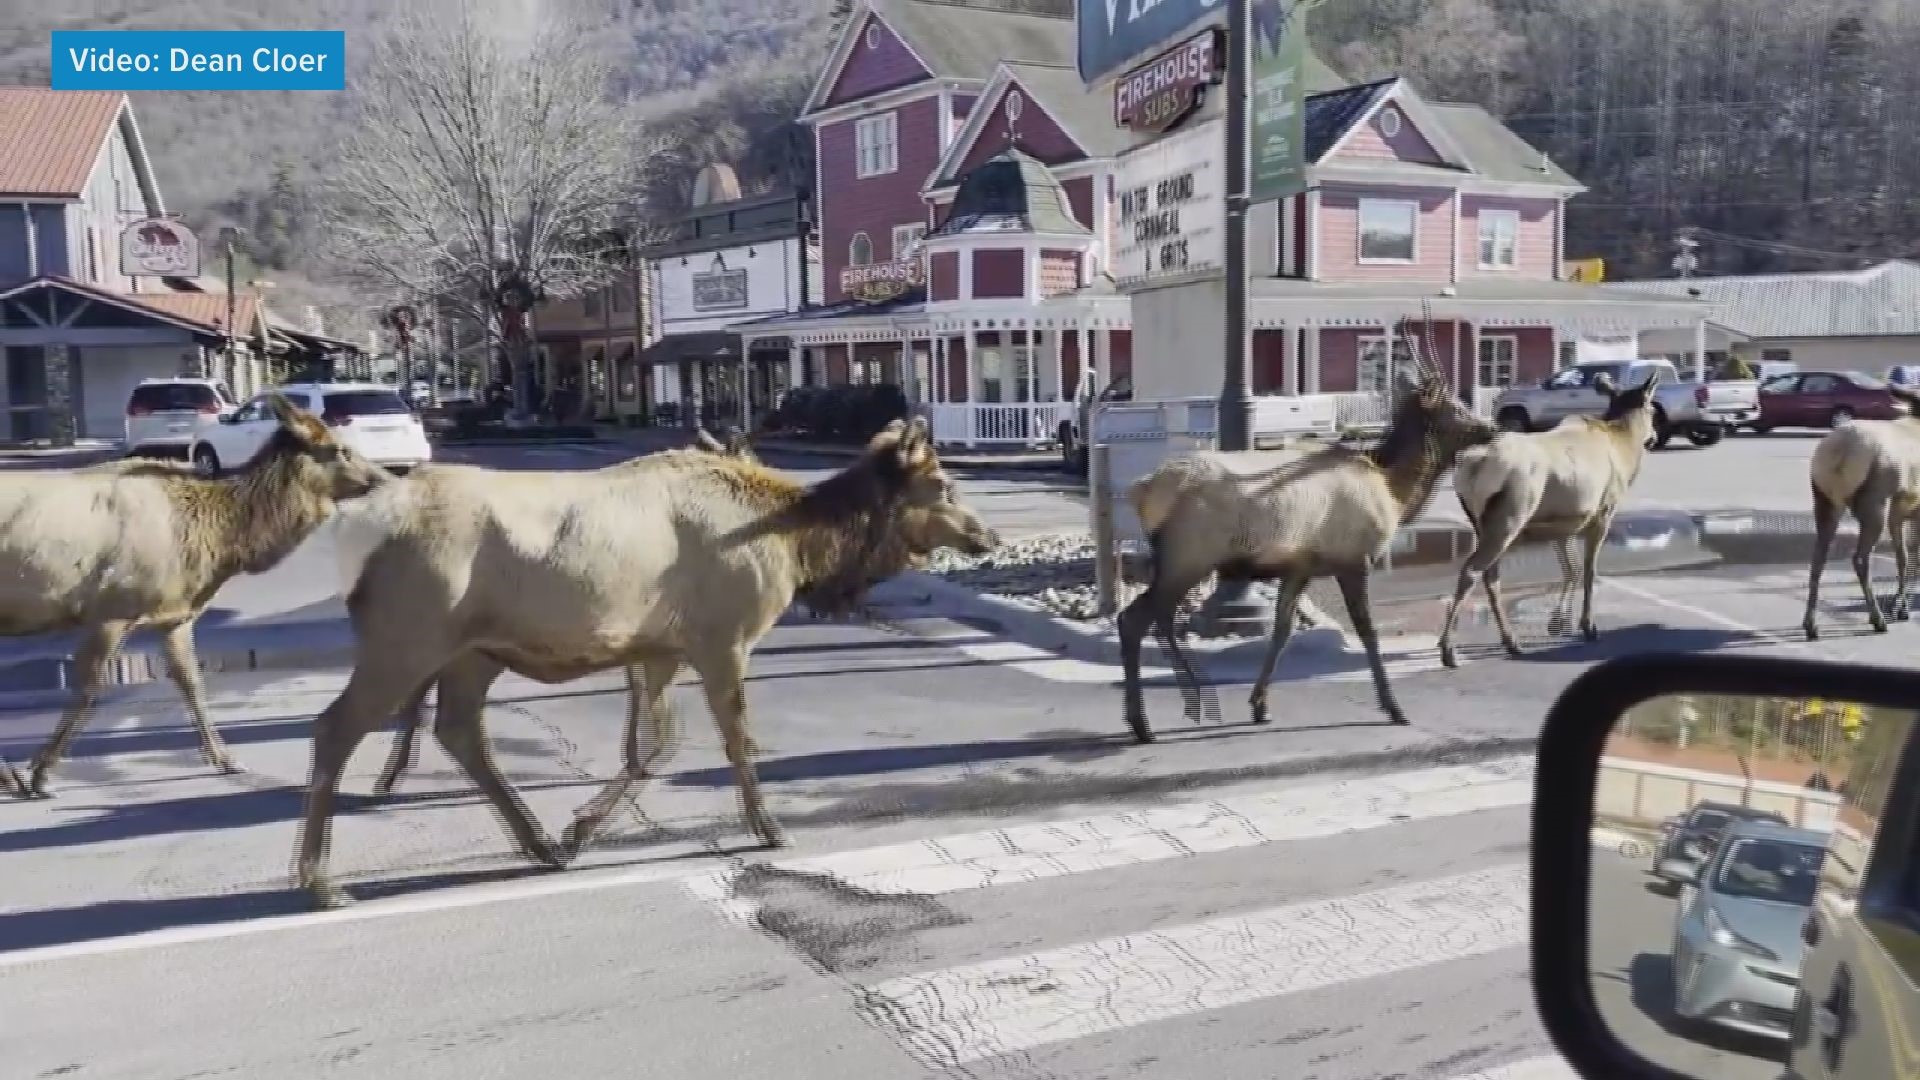 In the video, you can see several stopped cars as some elk saunter across the highway and others begin running.